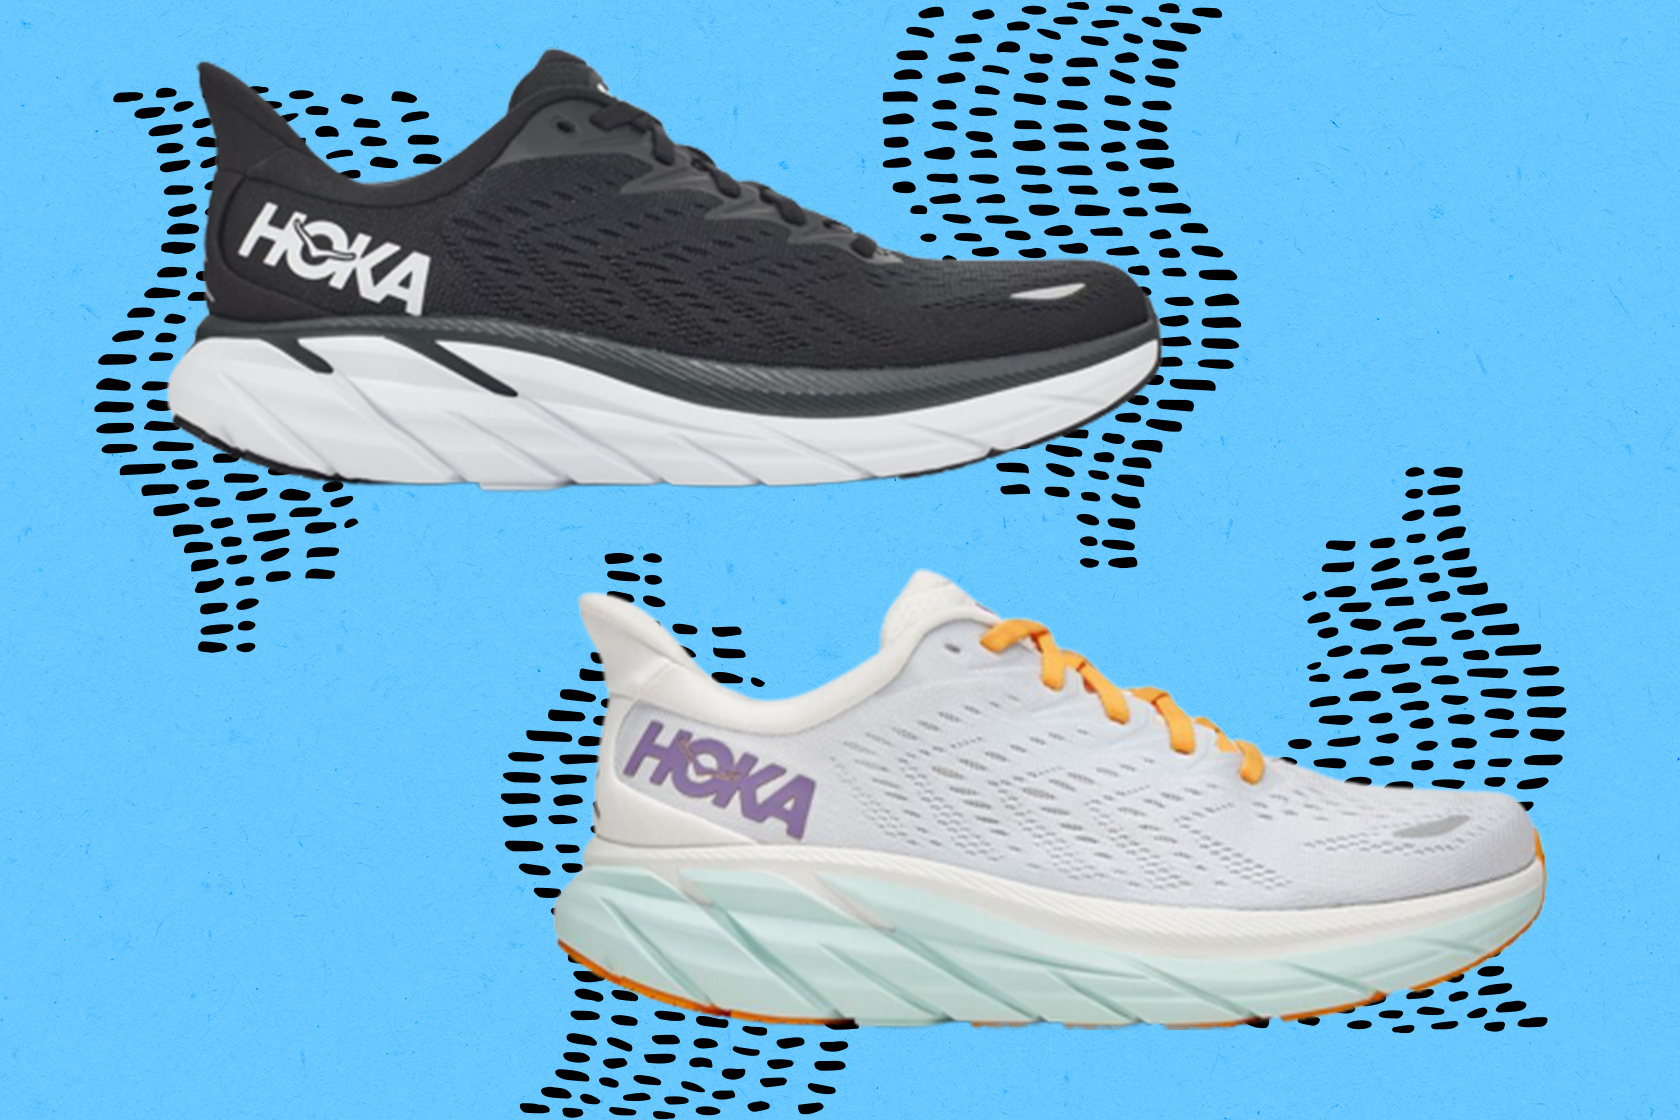 Get a pair of HOKA Clifton 8 sneakers for 20% off